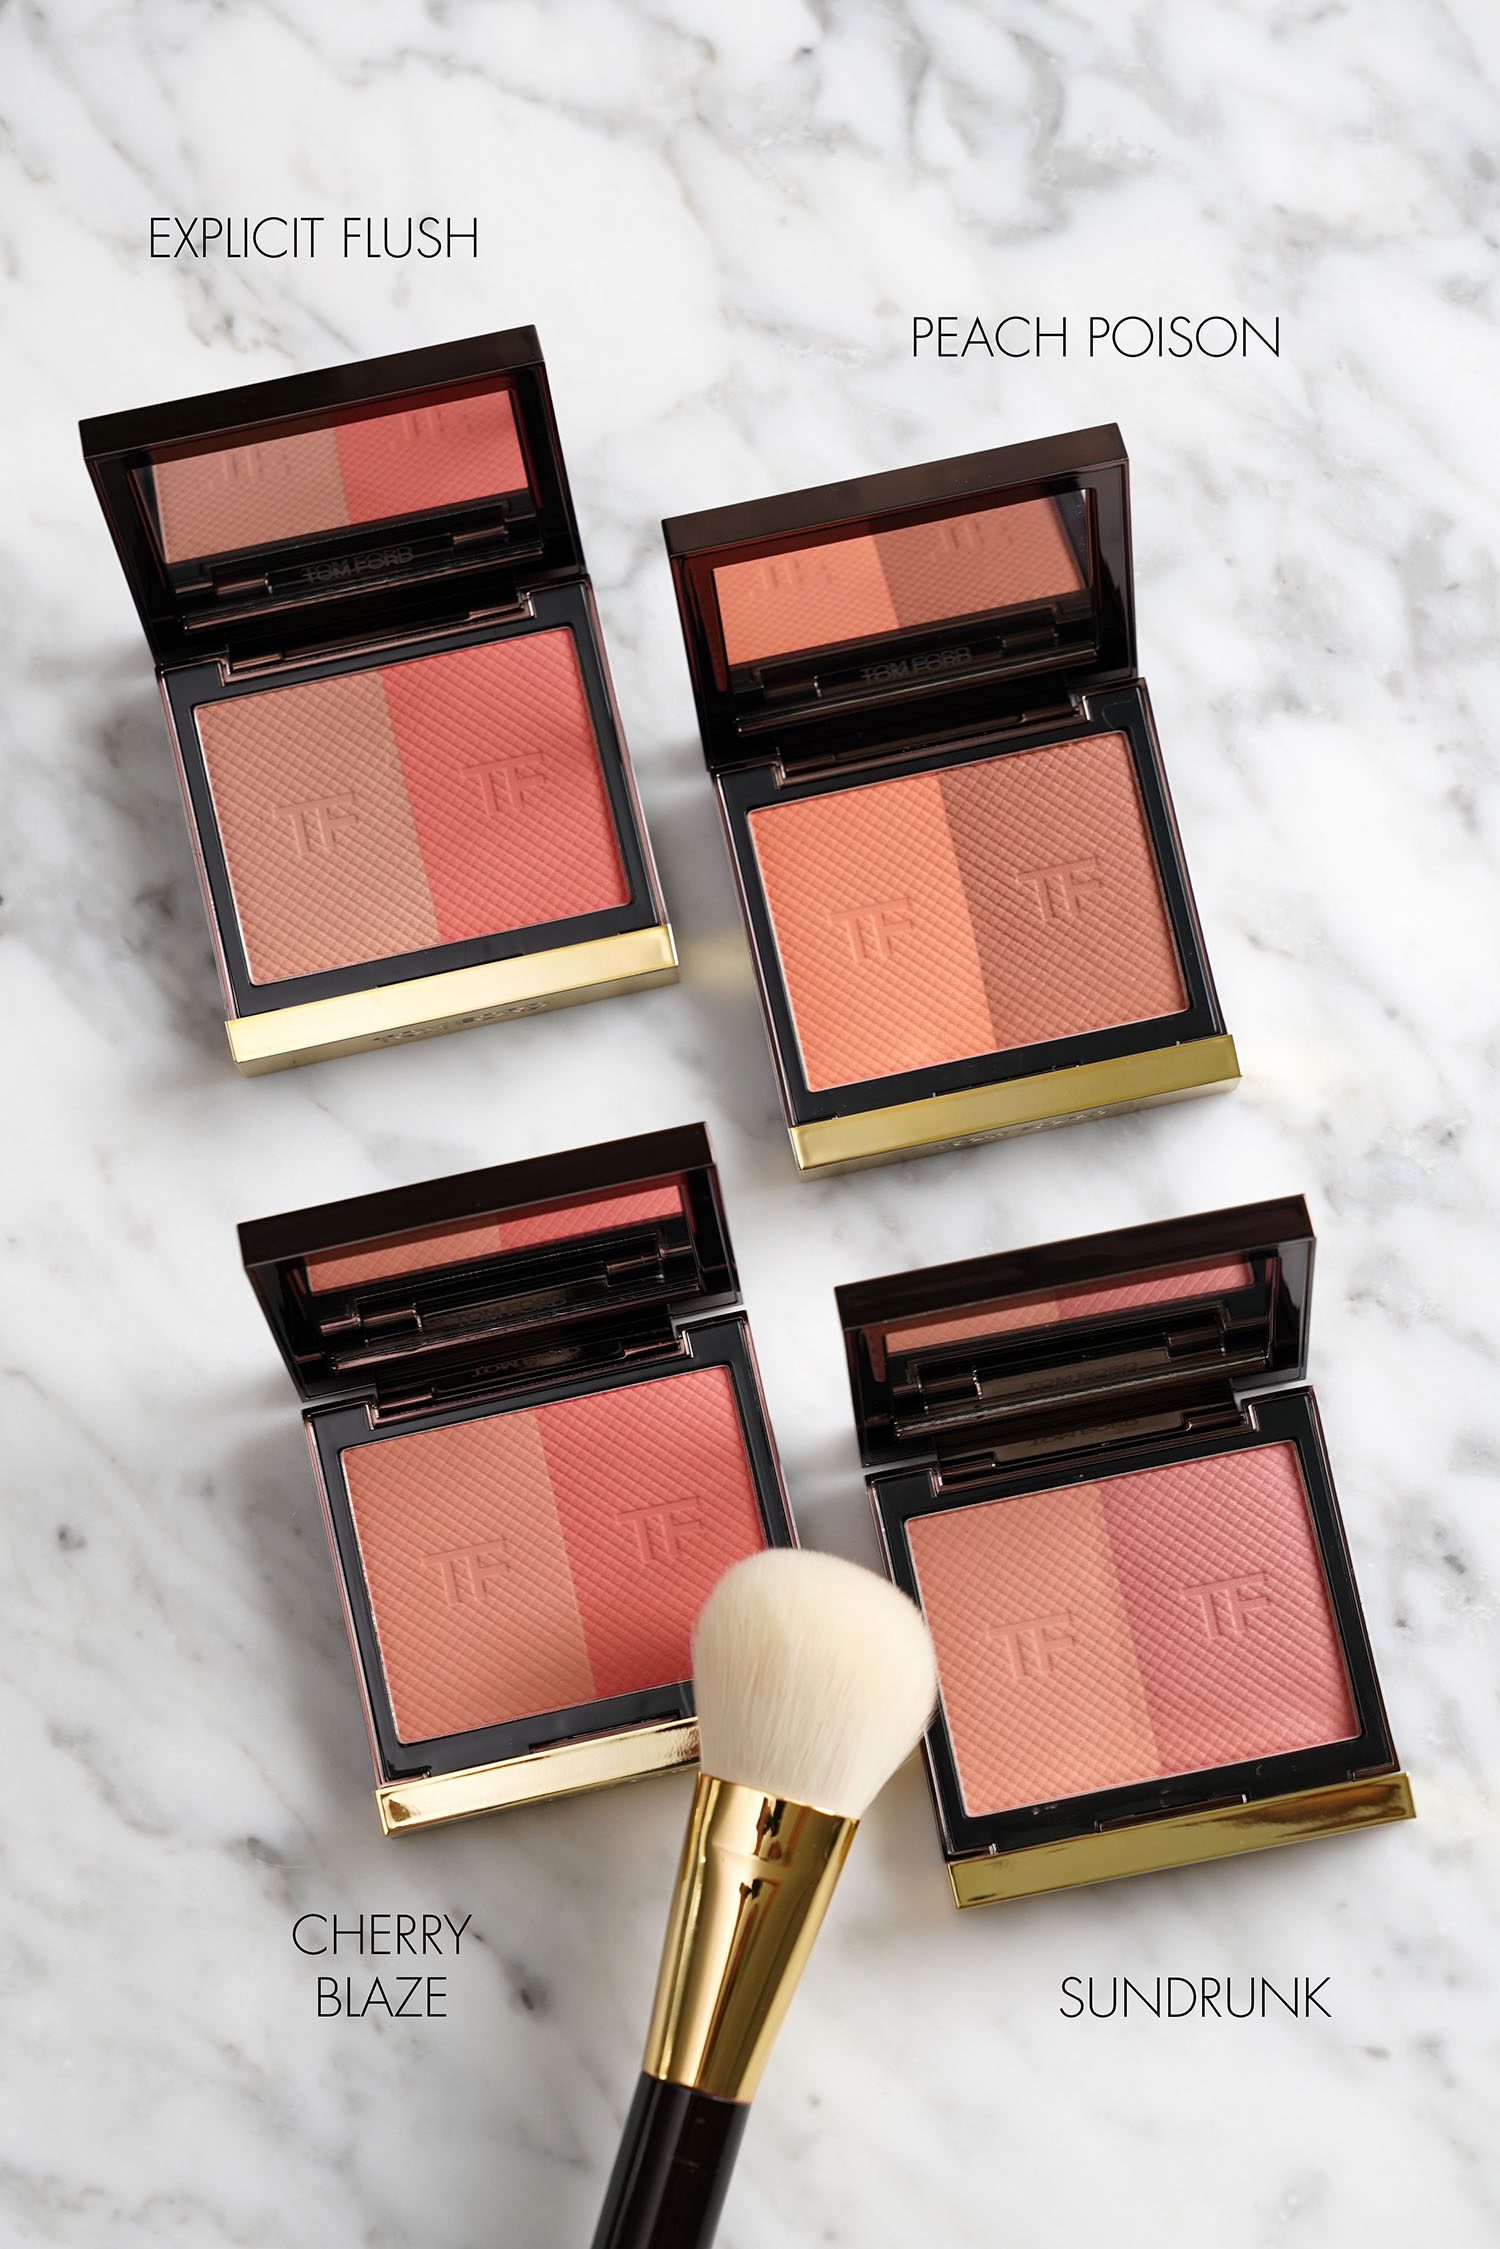 New Tom Ford Beauty Launches at Nordstrom - The Beauty Look Book